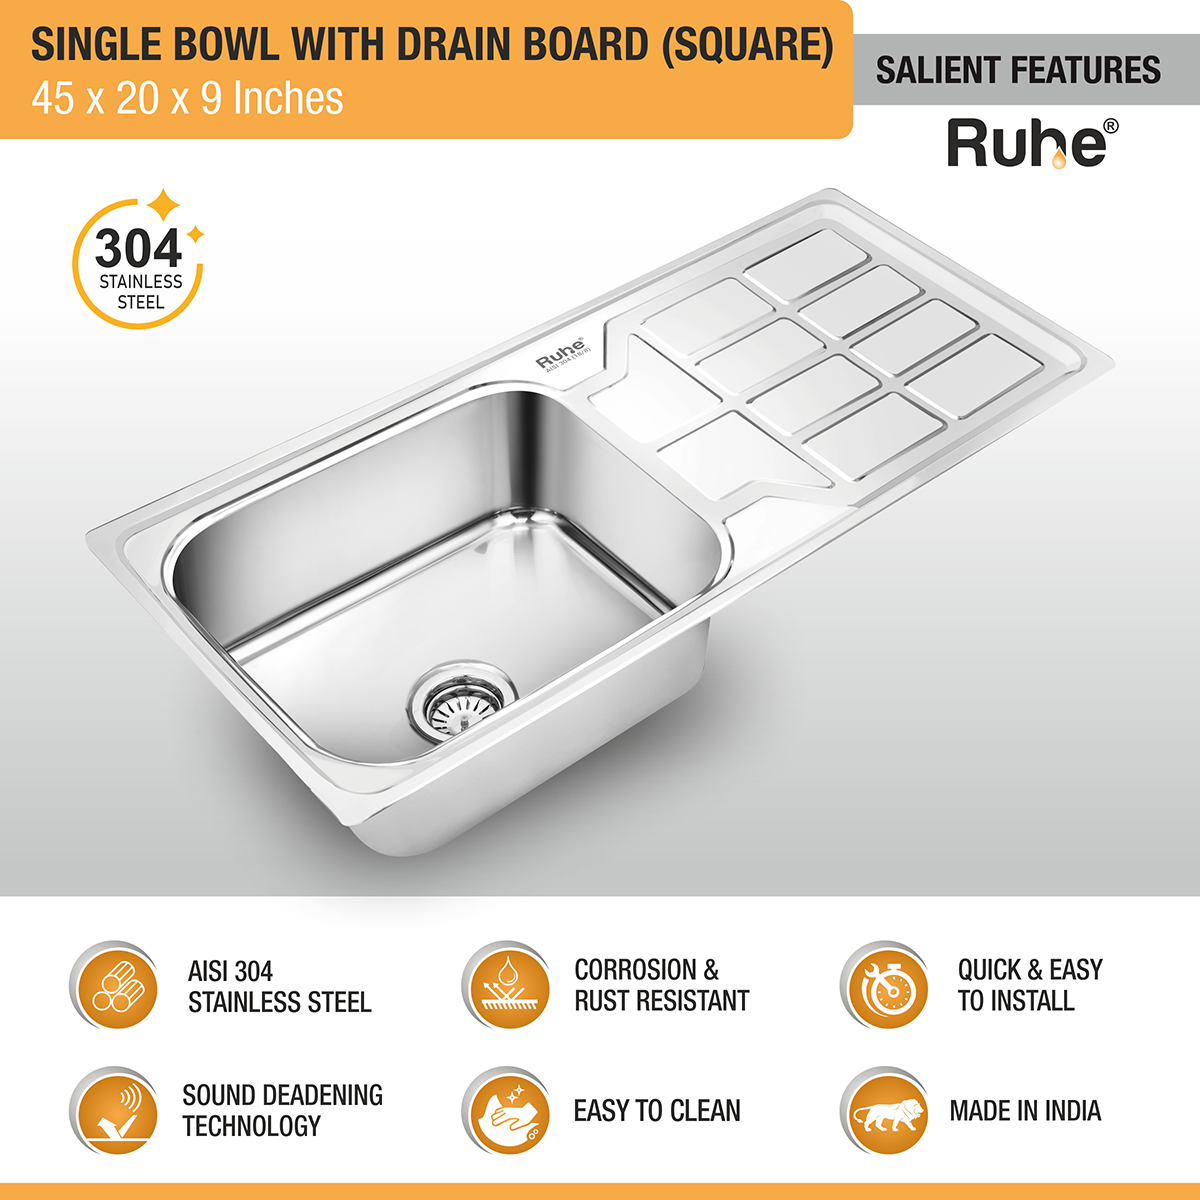 Square Single Bowl (45 x 20 x 9 Inches) 304-Grade Stainless Steel Kitchen Sink with Drainboard features and benefits